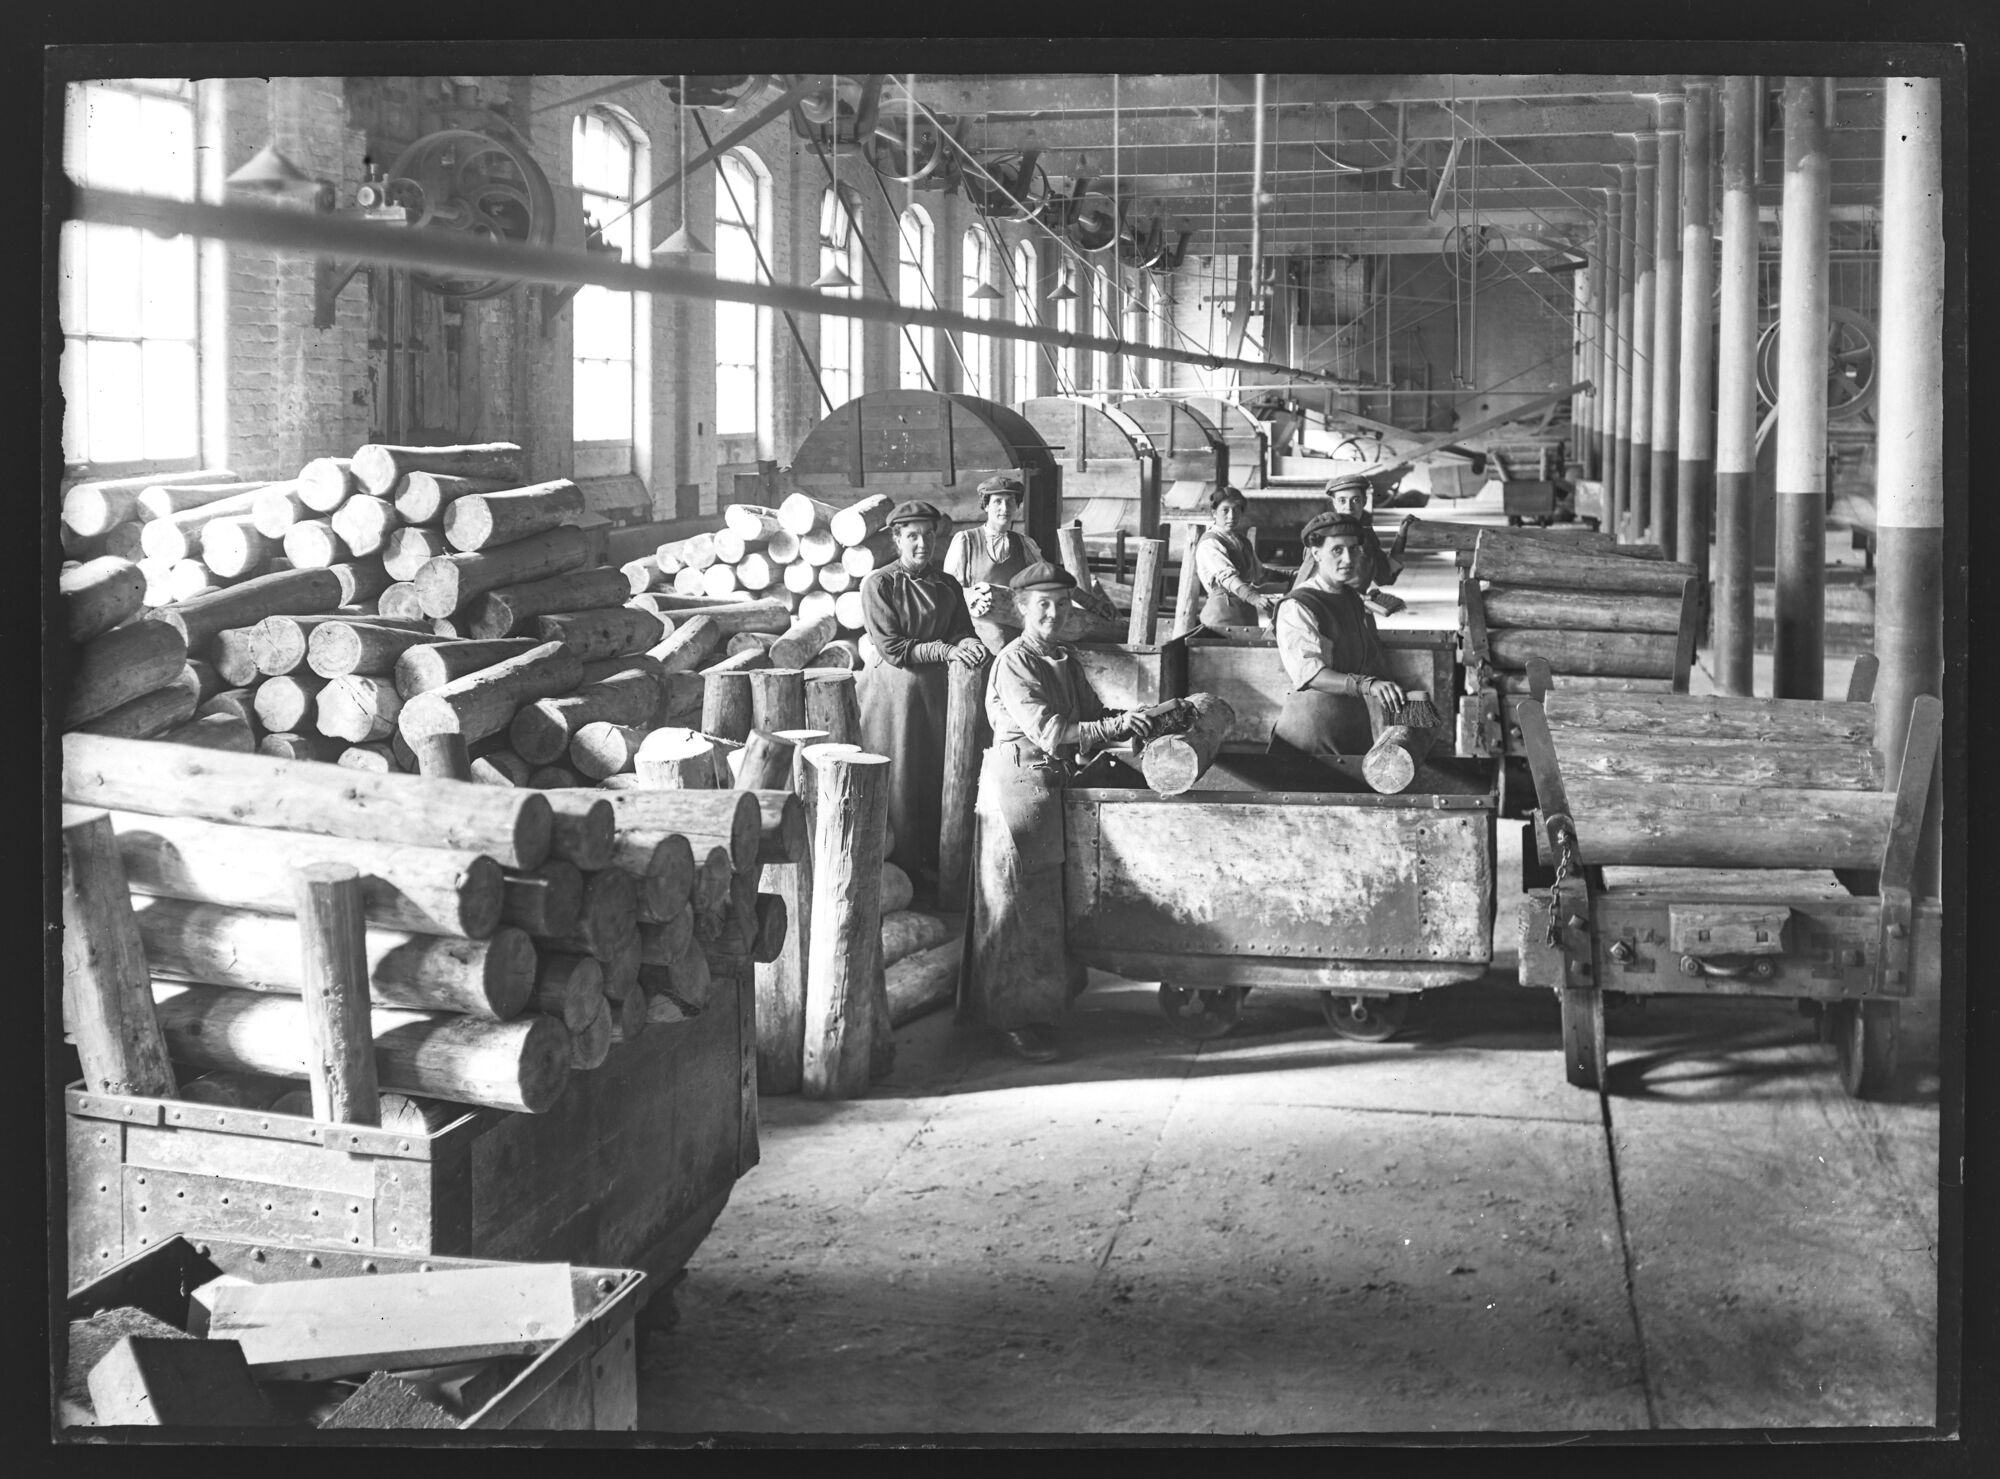 Cleaning the wood, Barrow papermill, Barrow-in-Furness